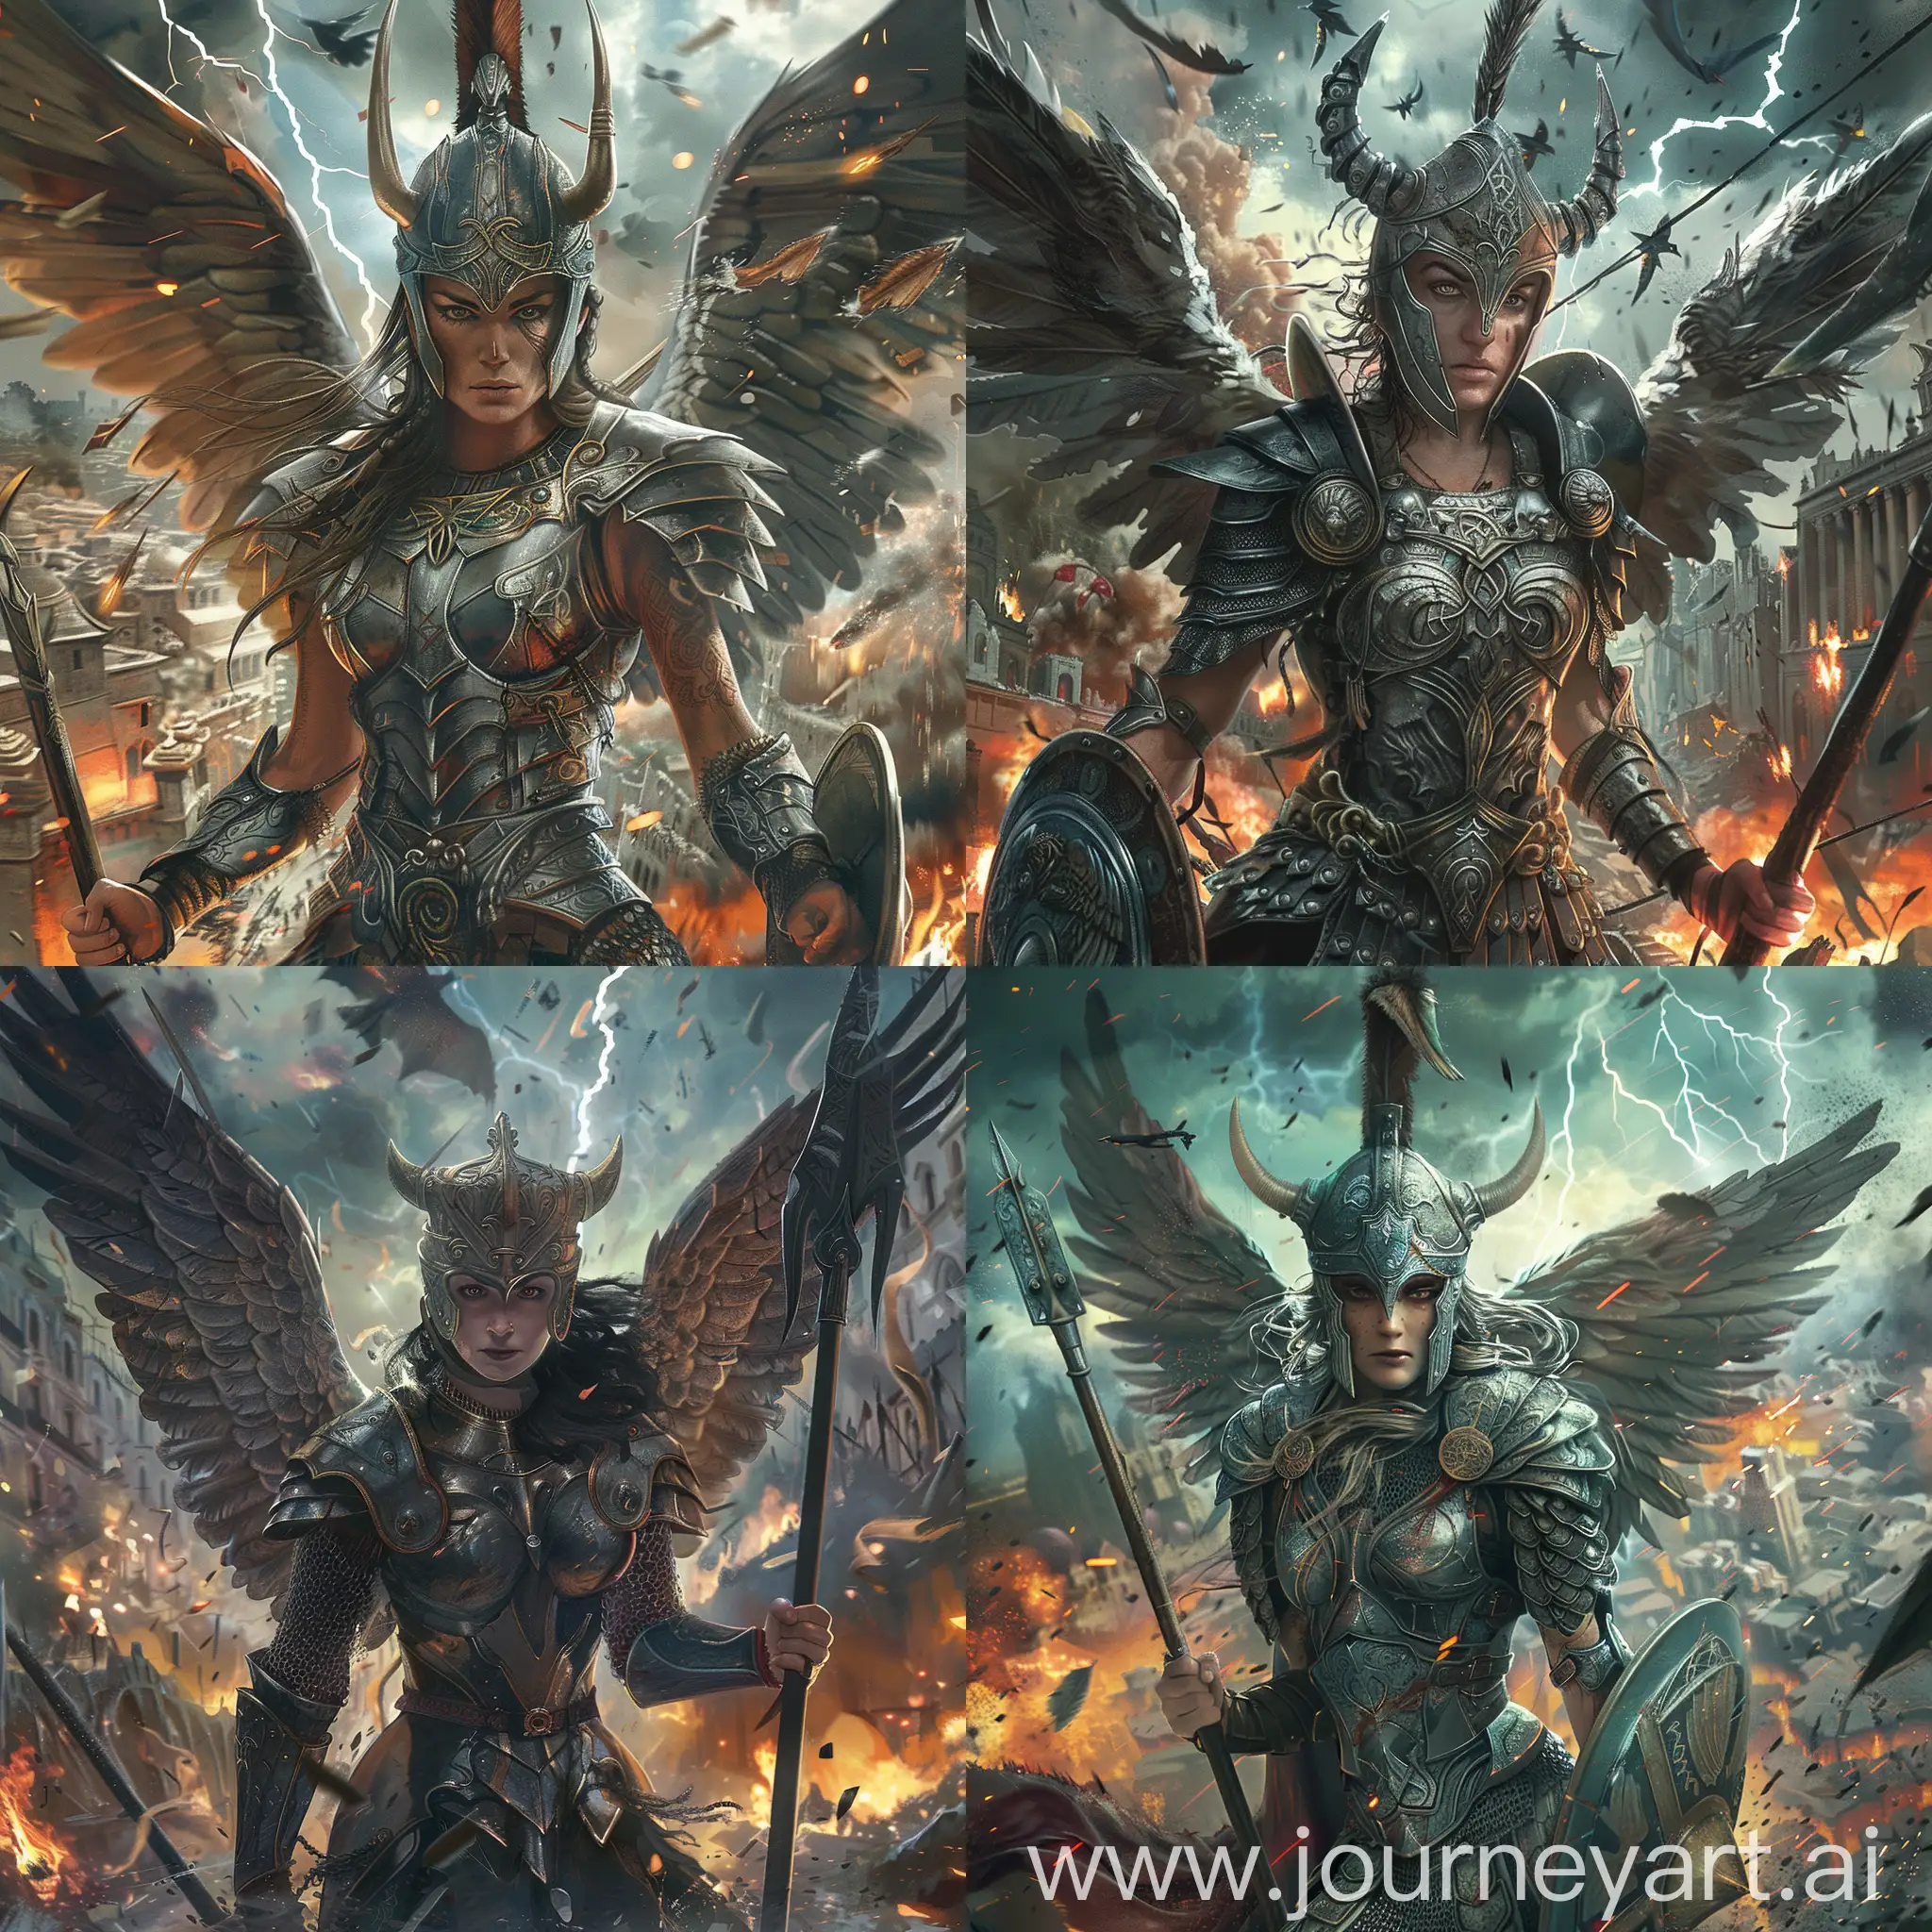 The Valkyrie is wearing a metal armor and a helmet, and she has a pair of wings on her back. She is holding a spear and a shield, and she looks like she is ready for battle. The city is chaotic and war-torn, and there are some explosions and fires in the background. The sky is dark and stormy, and there are some lightning bolts and thunder in the air.